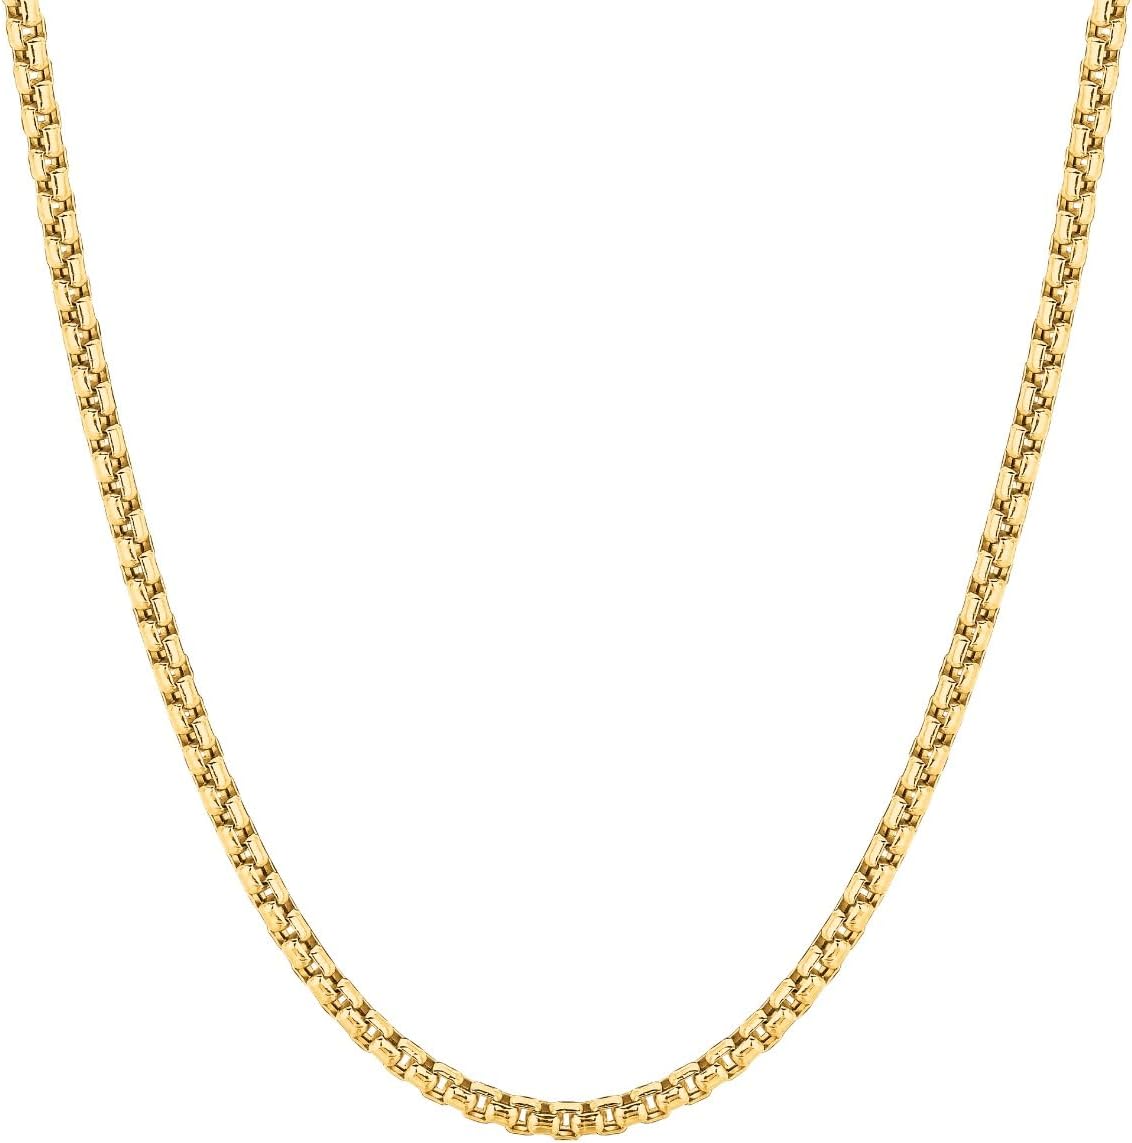 10k Yellow Gold 2.5mm Lite Round Box Link Chain Necklace